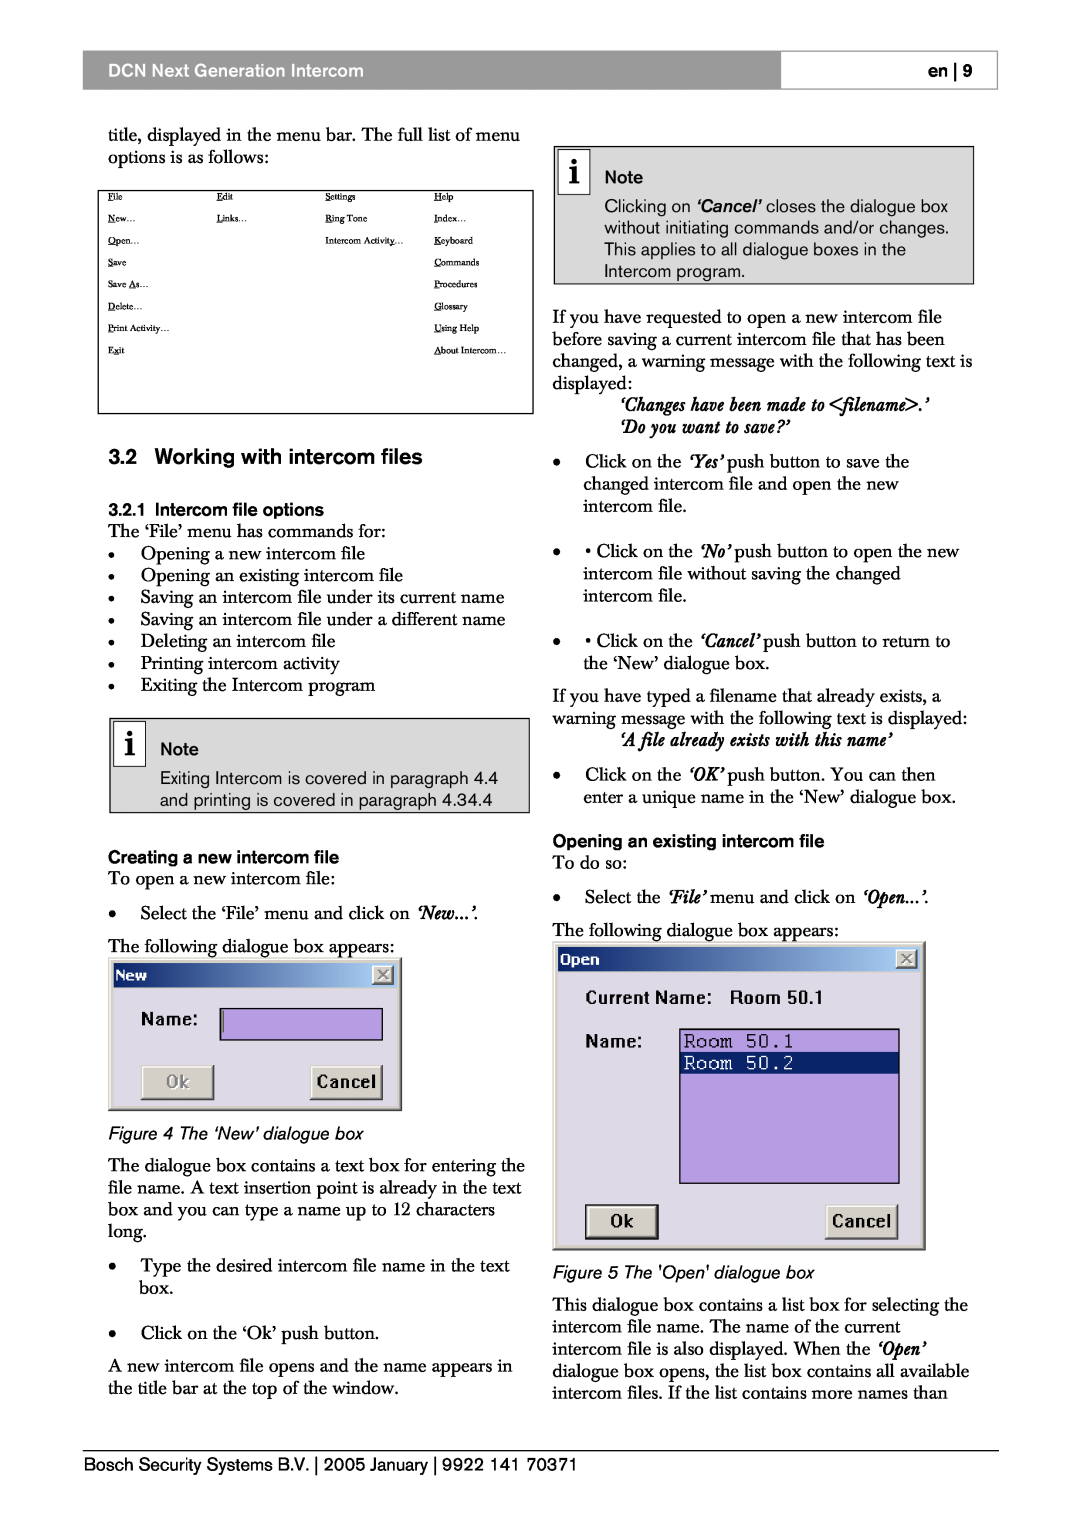 Bosch Appliances LBB4173, 0 user manual Working with intercom files, The ‘New’ dialogue box, The Open dialogue box 